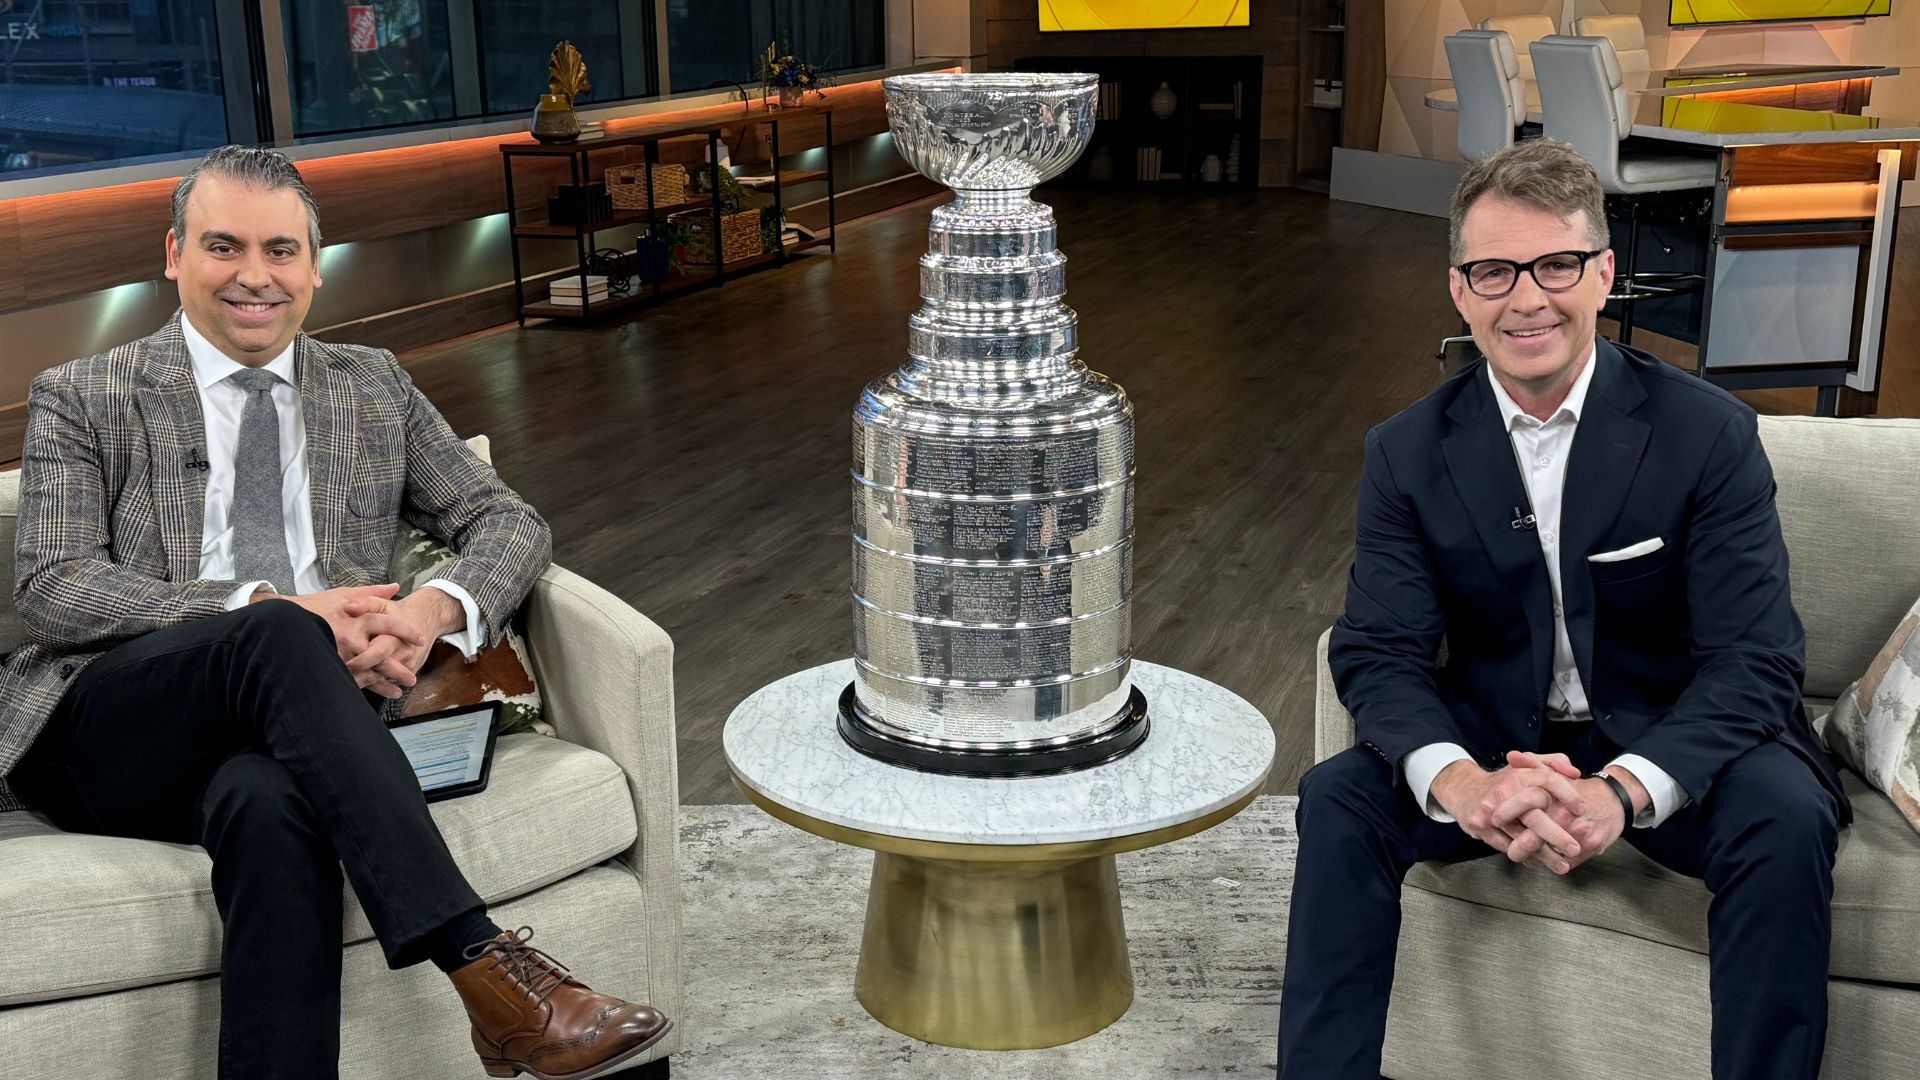 The Stanley Cup joins us LIVE in studio